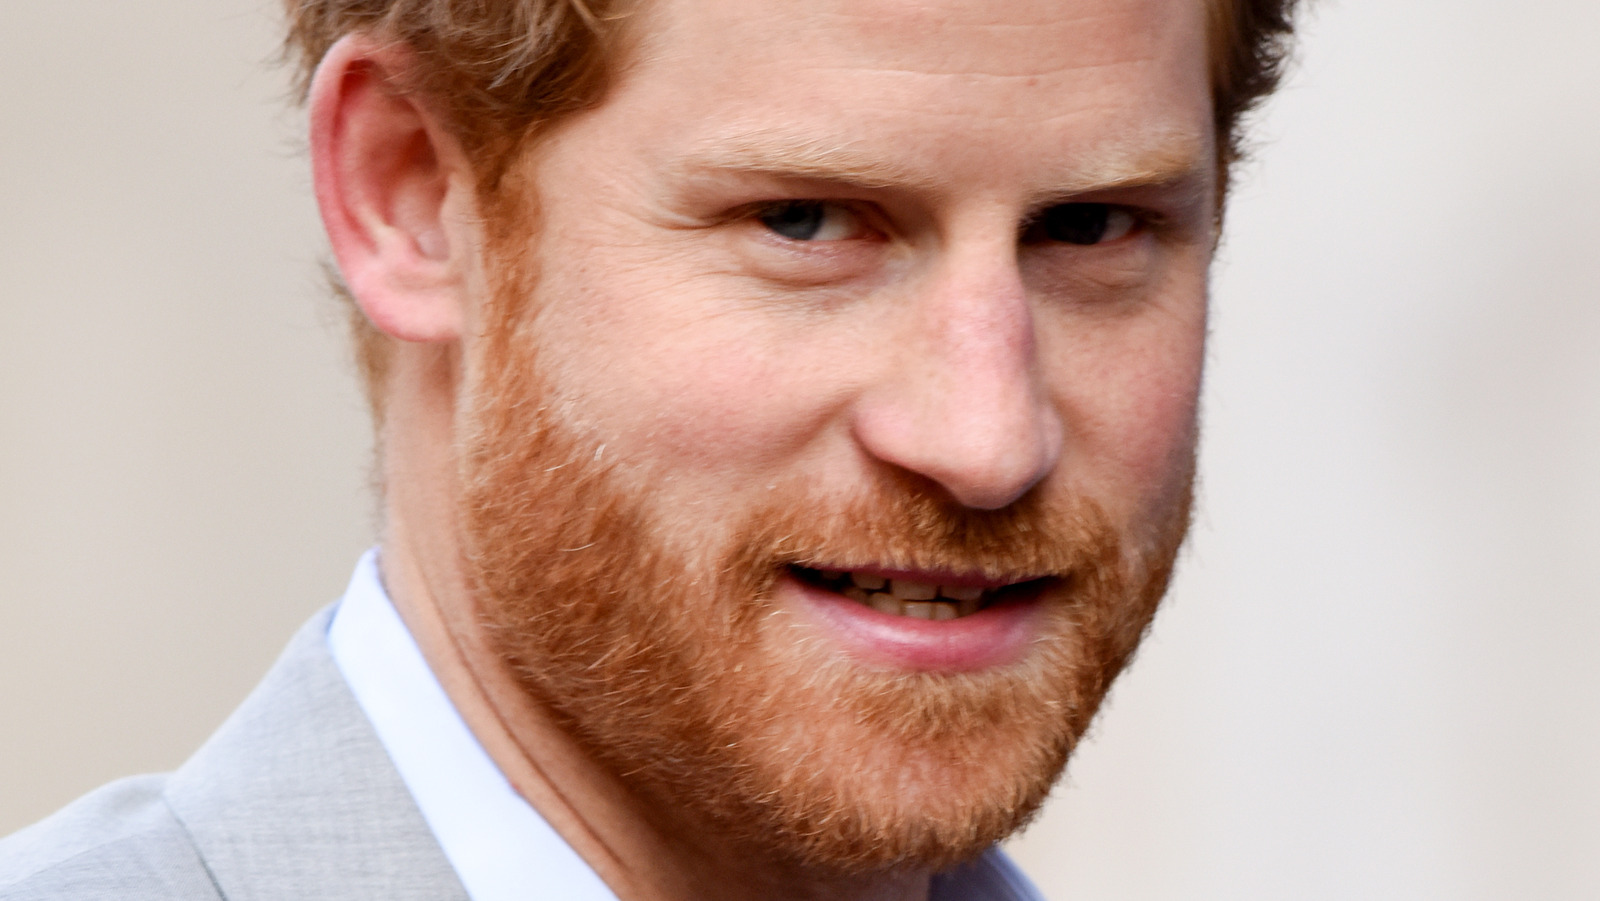 It was rumored that Prince Harry had a fling with the famous singer